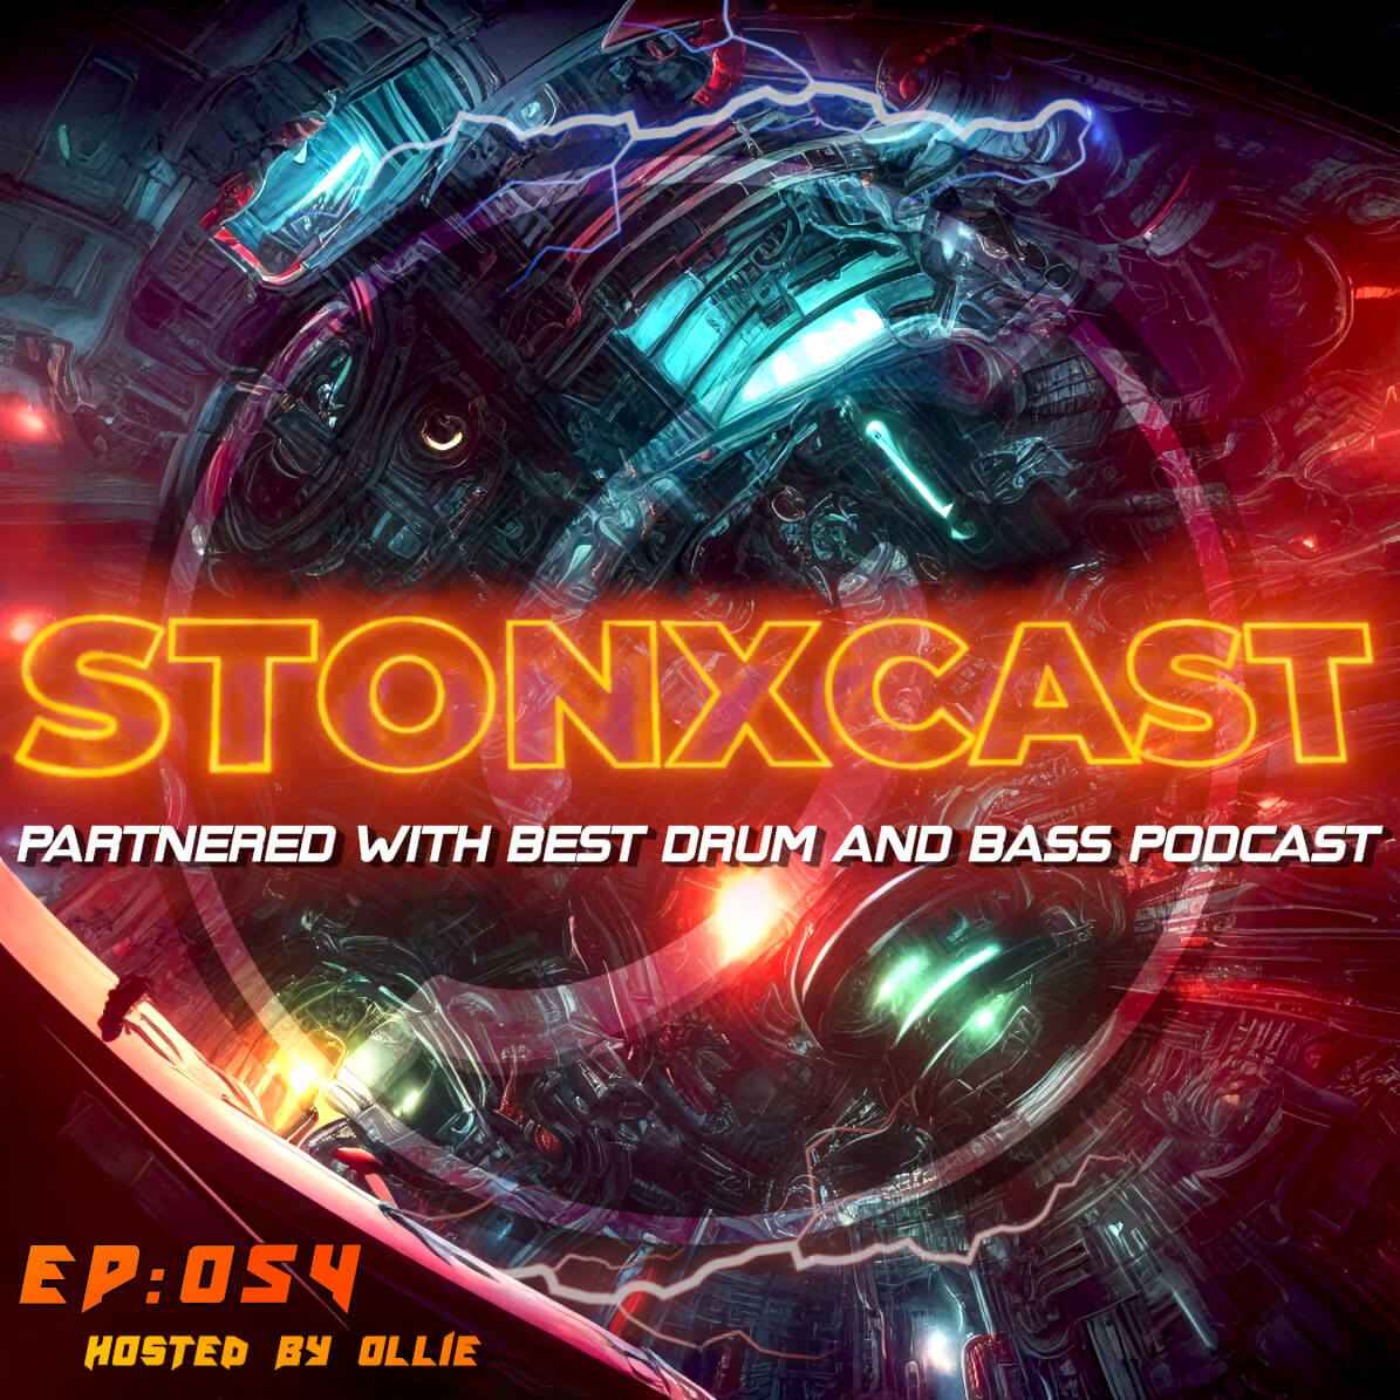 Stonxcast EP:054 - Hosted by Ollie Artwork